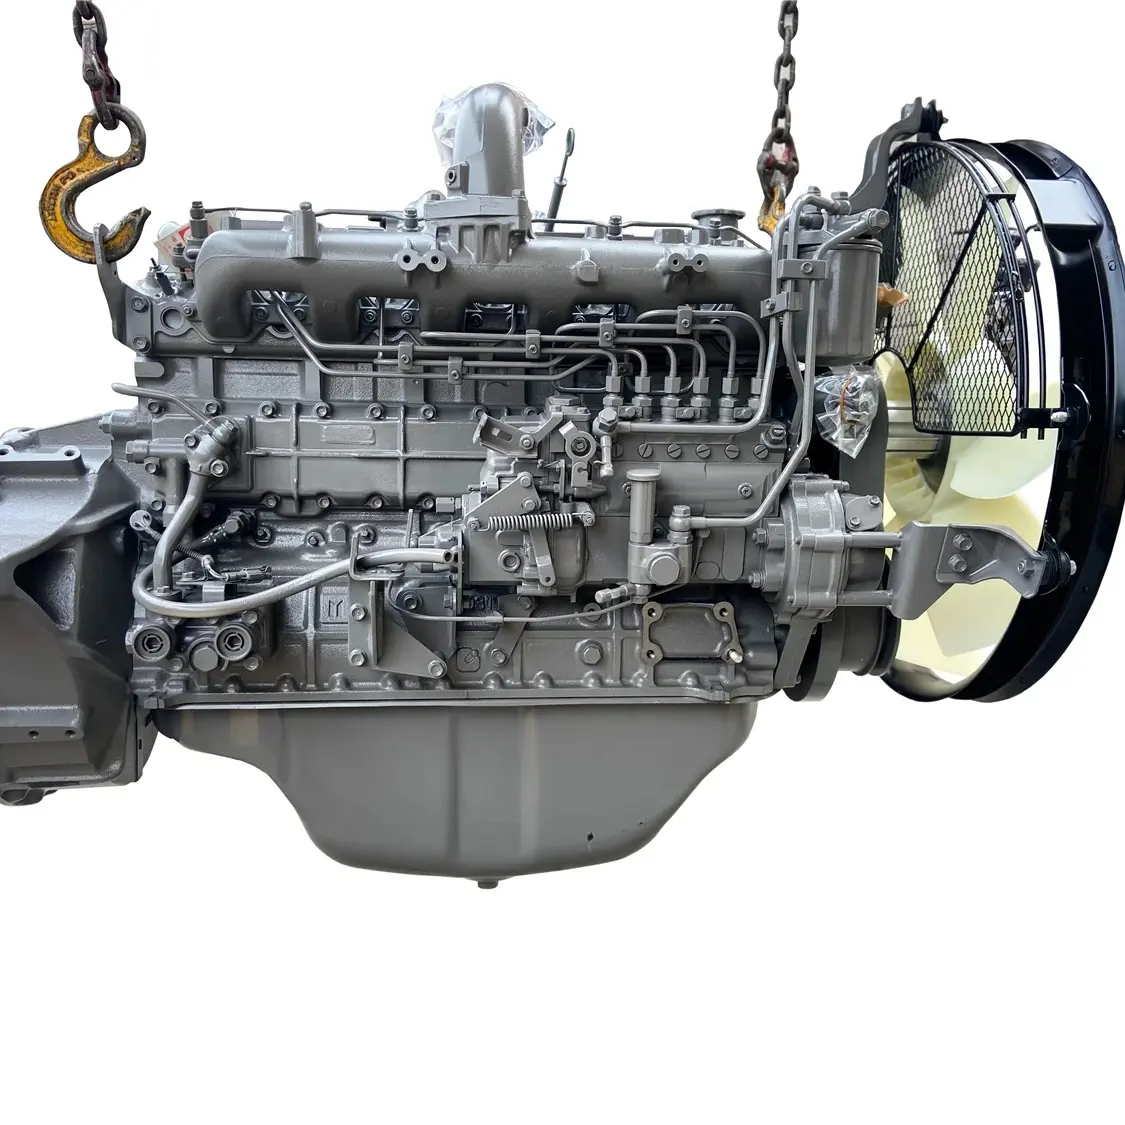 New used rebuit new original 6BG1 engine with good condition and low price for Isuzu engine